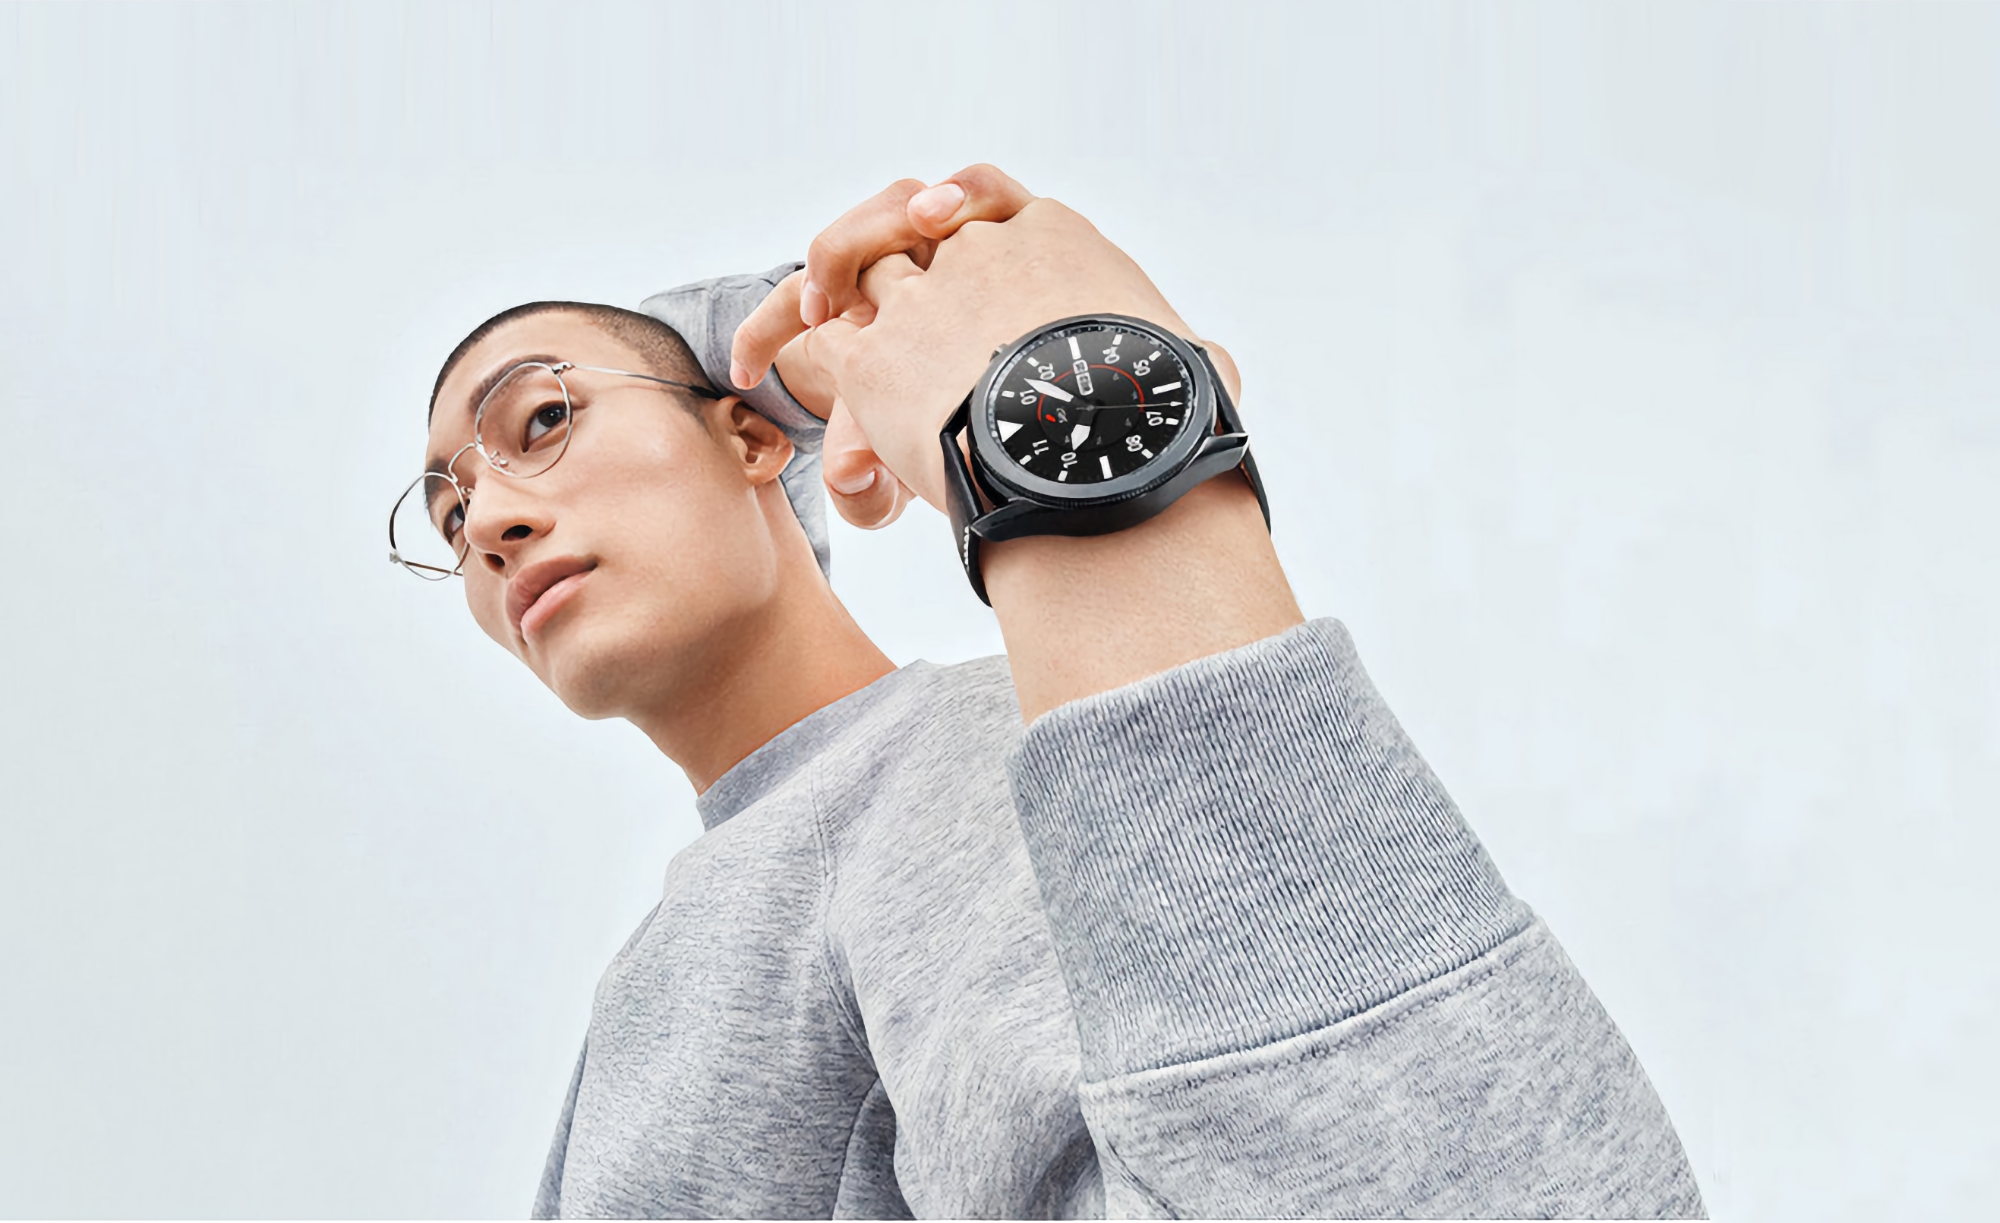 Samsung has released a major update for the Galaxy Watch 3: new watch faces and snore detection